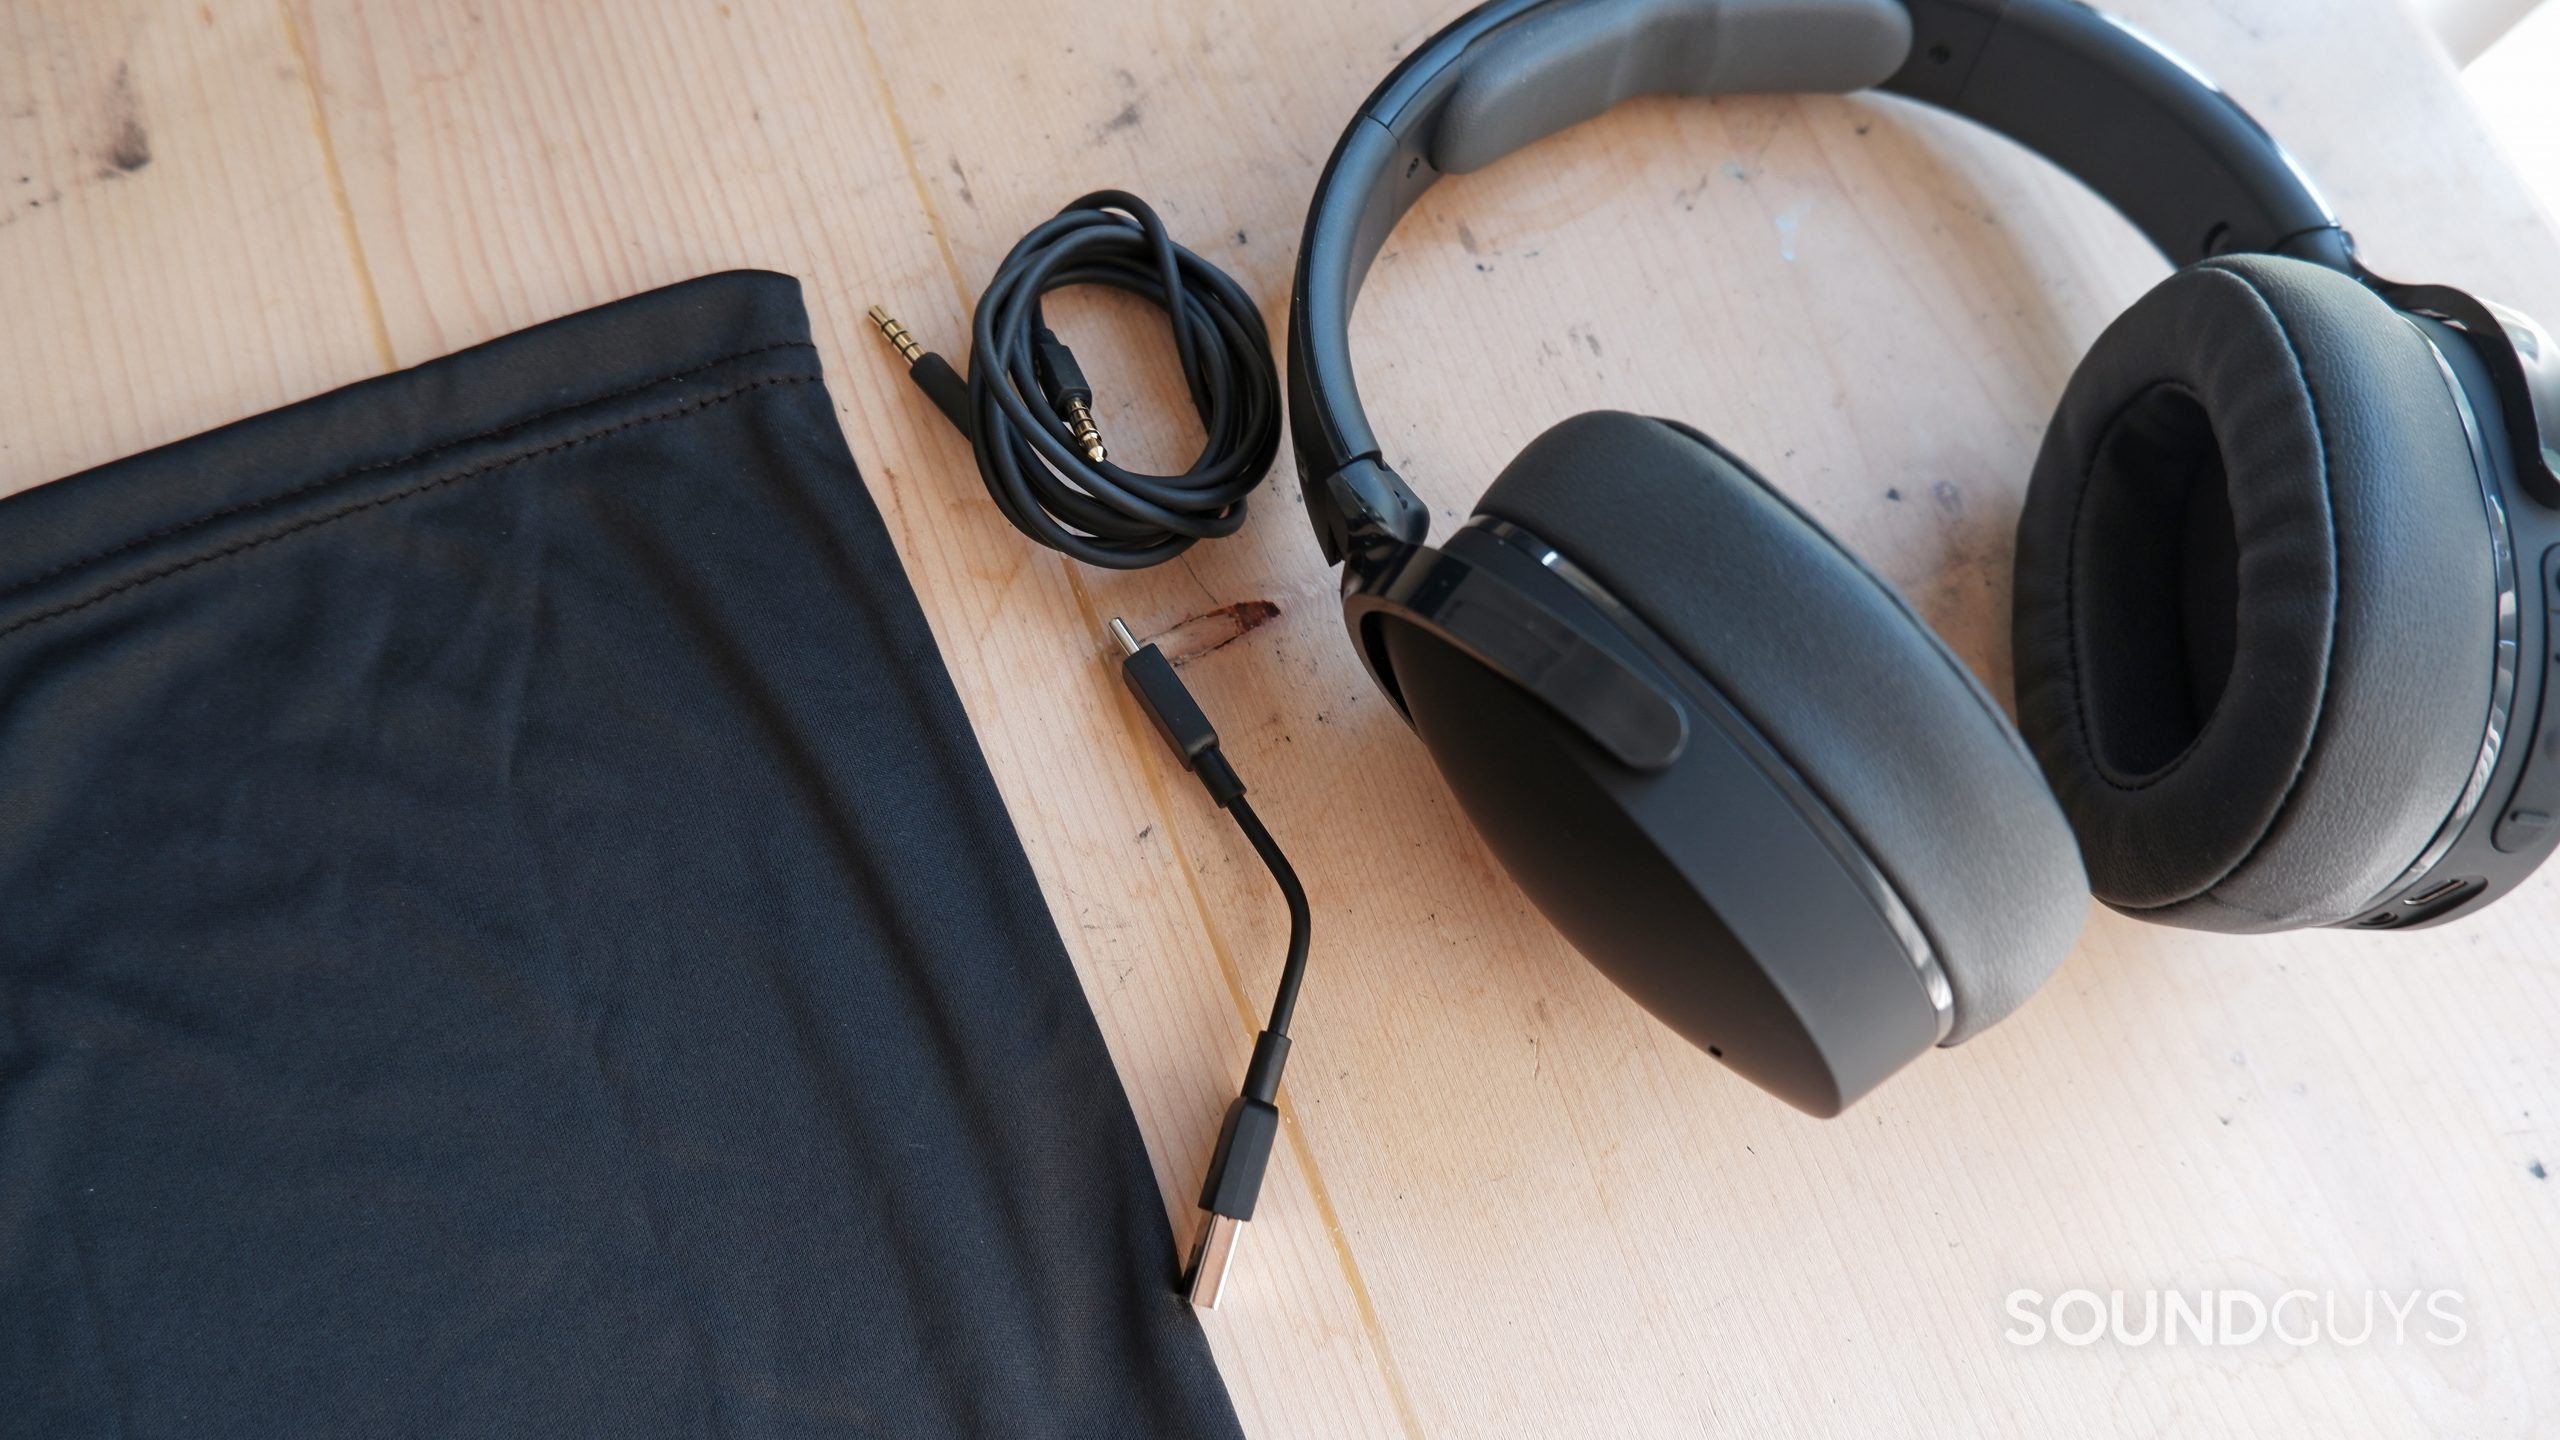 The Skullcandy Hesh ANC alongside the fabric case, 3.5mm cable, and USB-C charging cable.